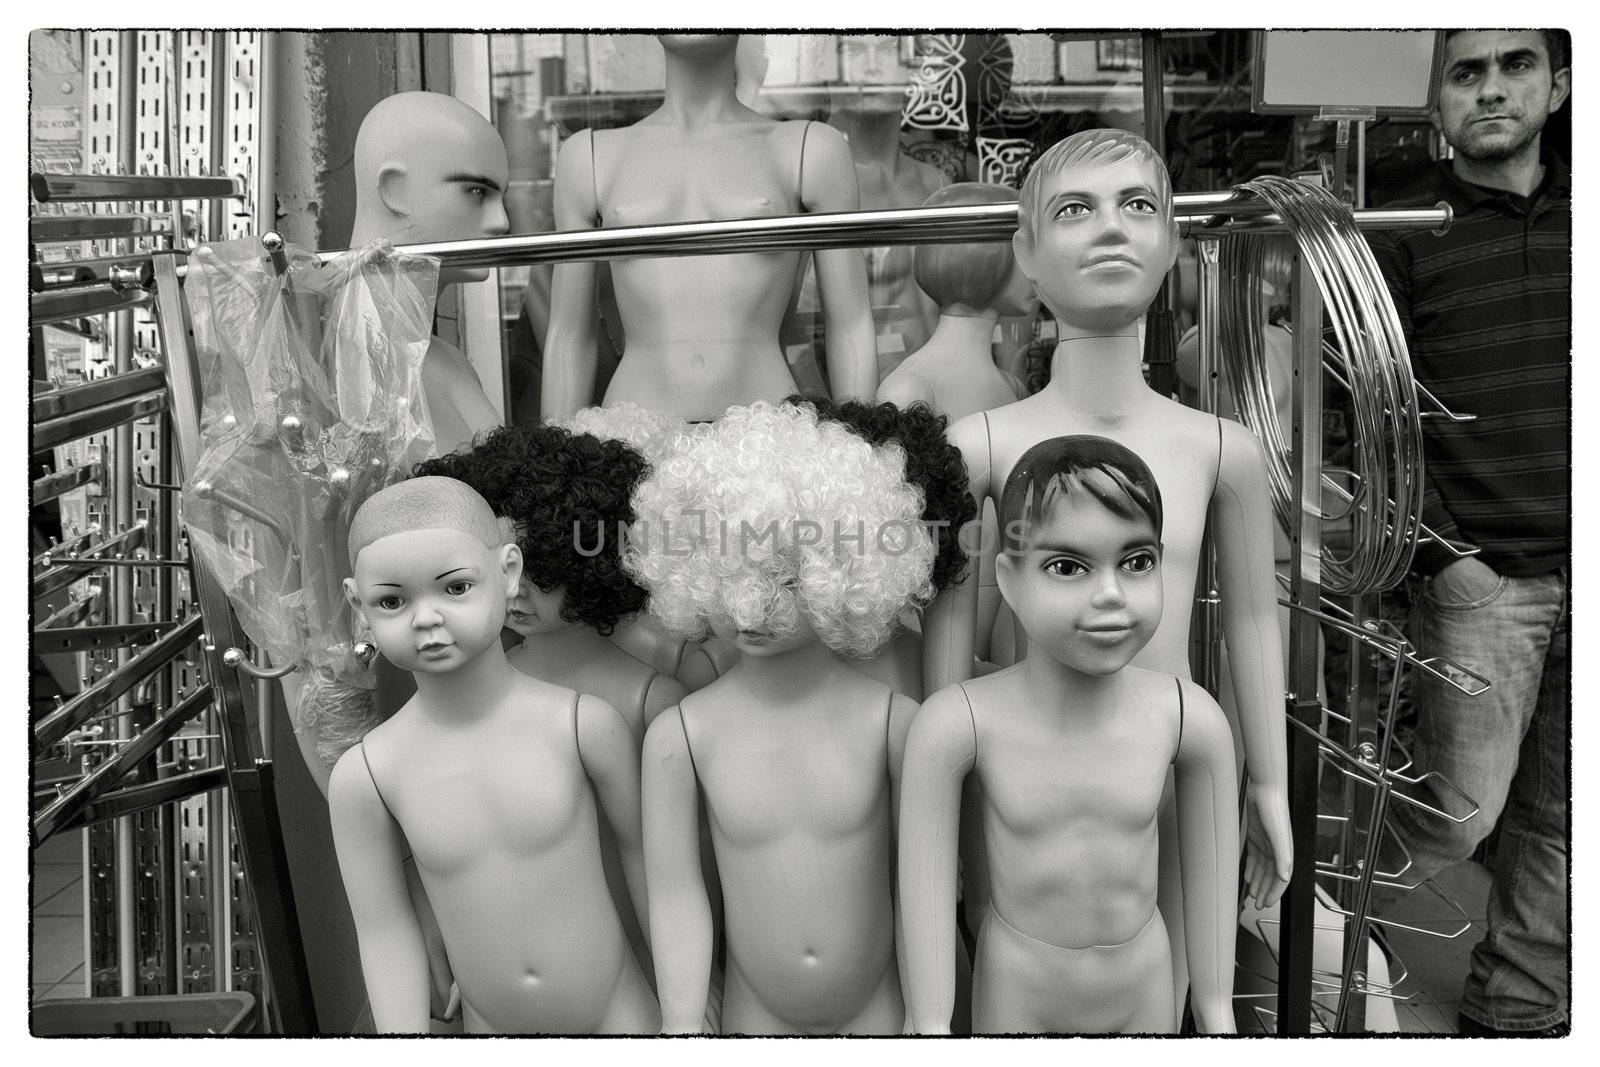 UNDRESSED MANNEQUINS, ISTANBUL, TURKEY, APRIL 12, 2012: Shopkeeper outside his store with mannequin dolls and shop equipment waiting for customers.